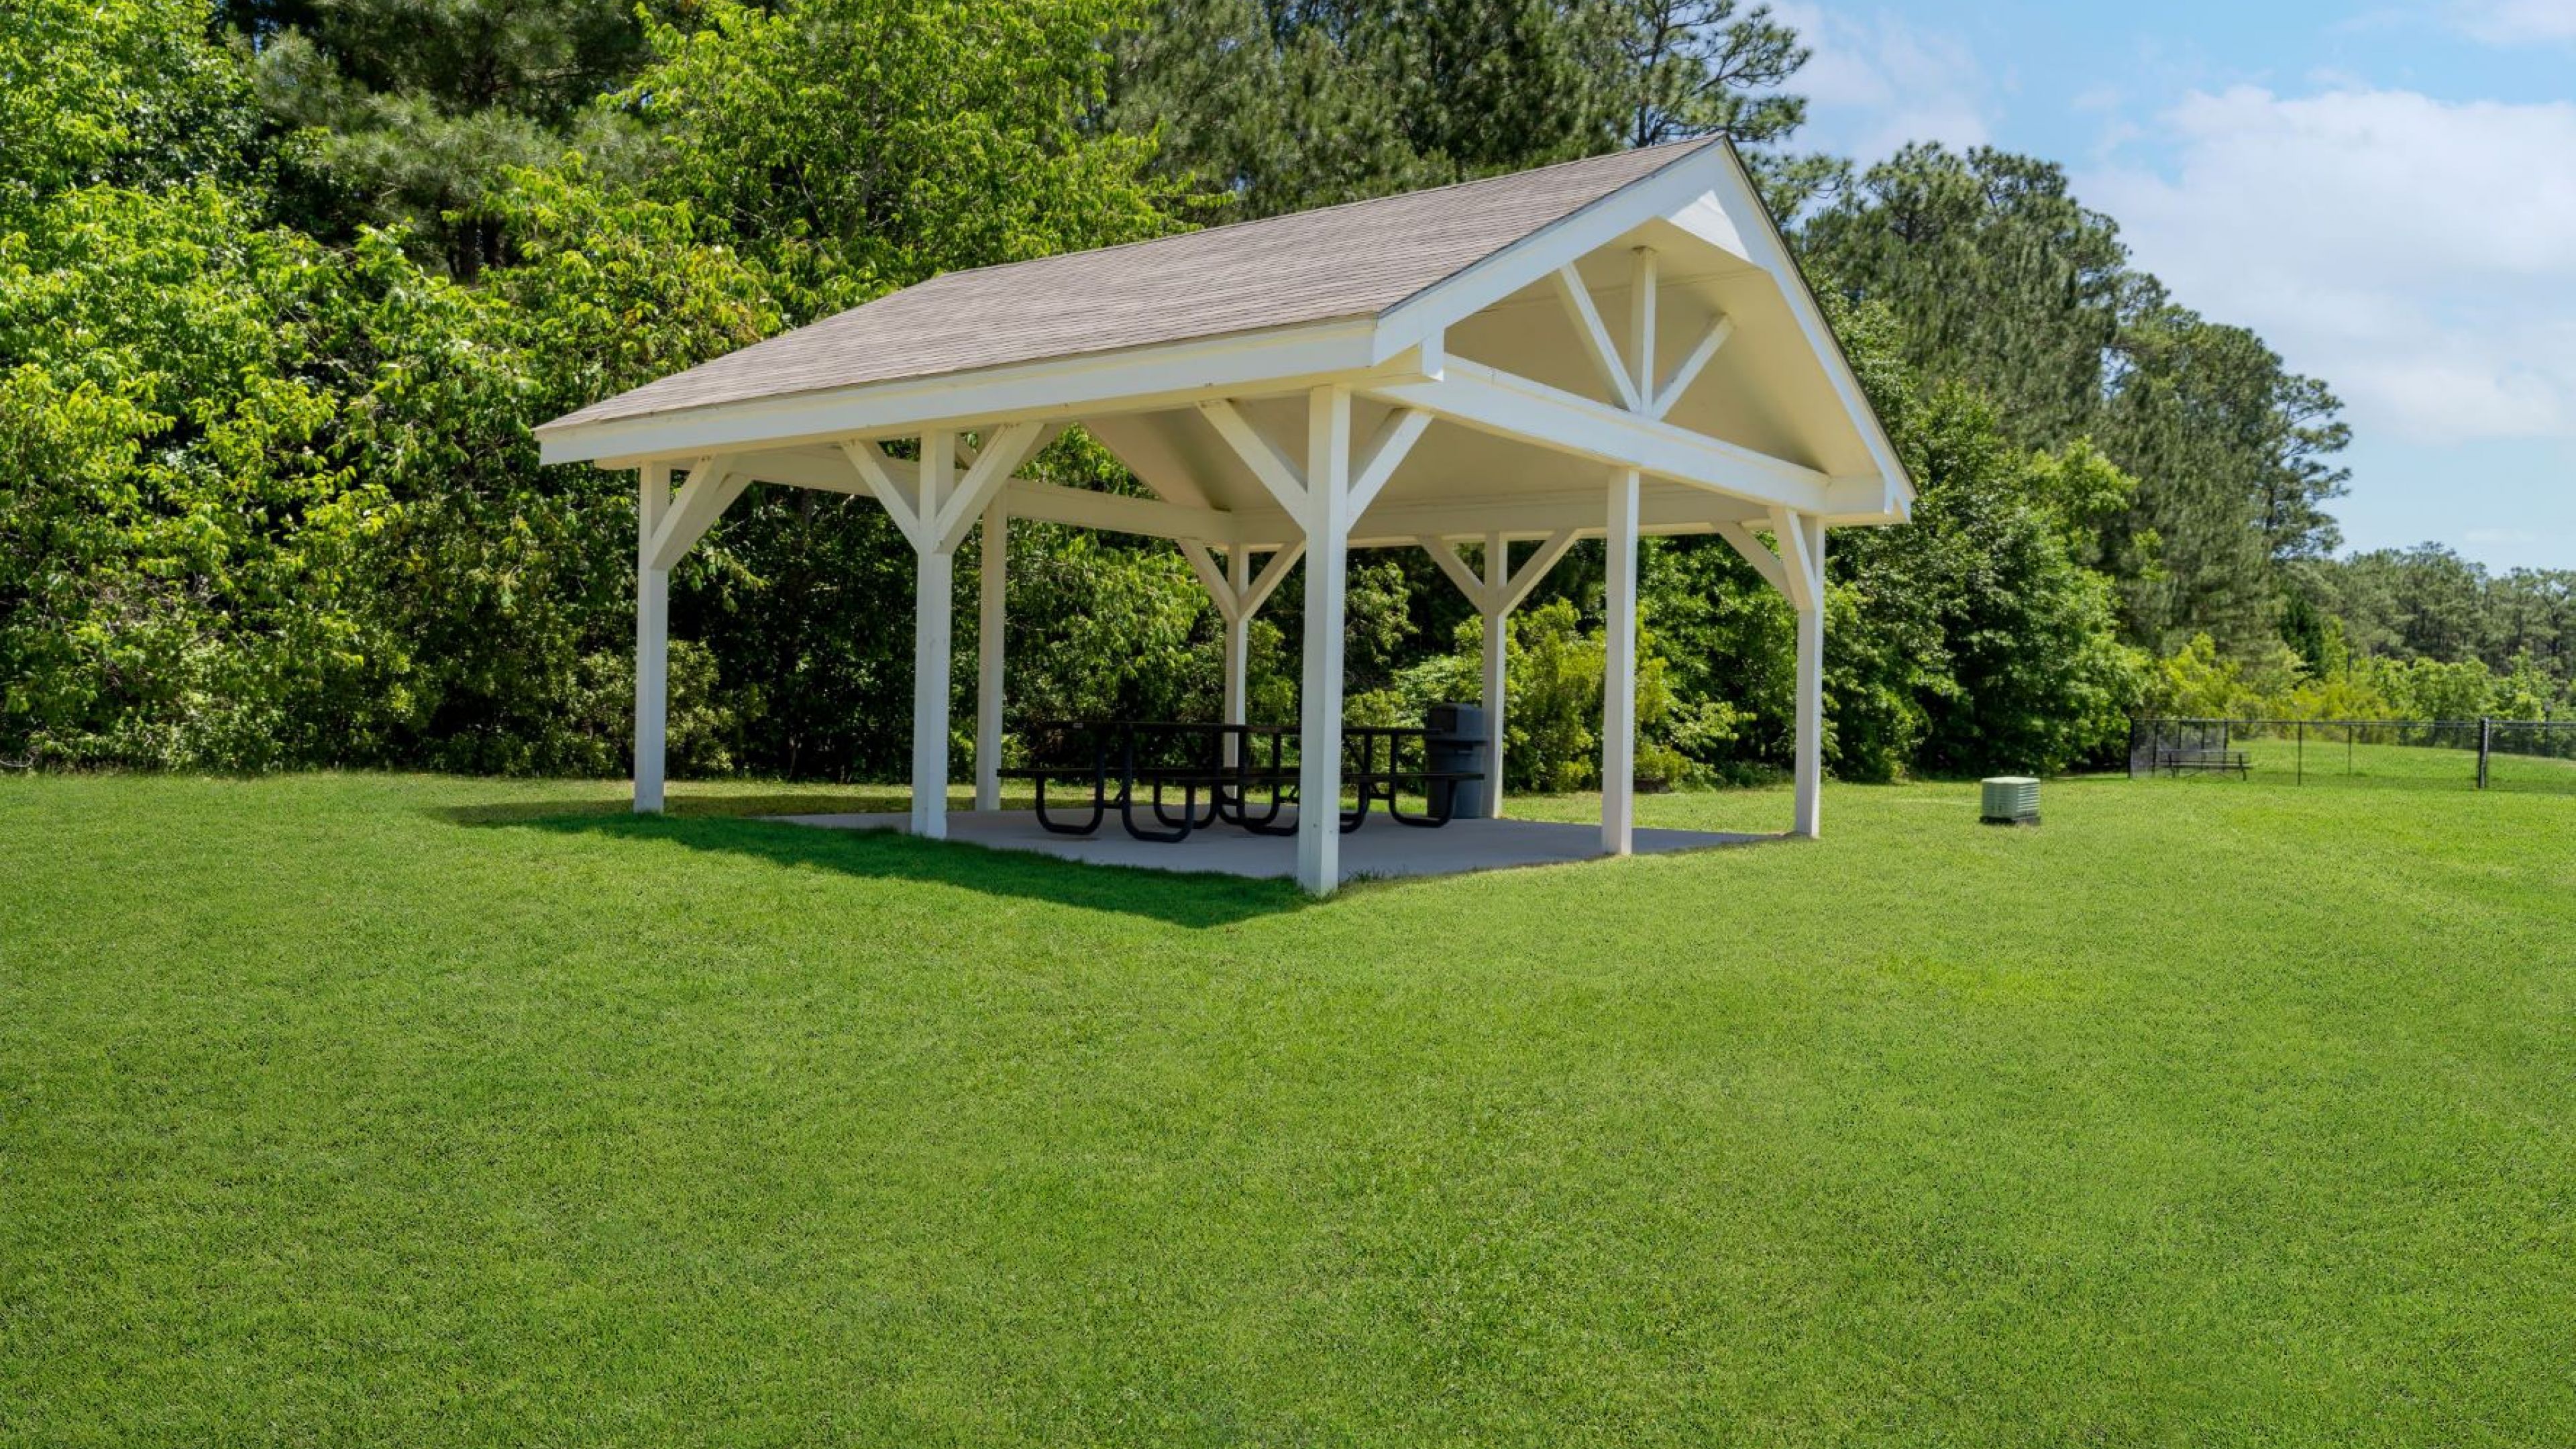 Hawthorne at the Pines spacious picnic pavilion with a white roof set in a green park area, offering a relaxing community space